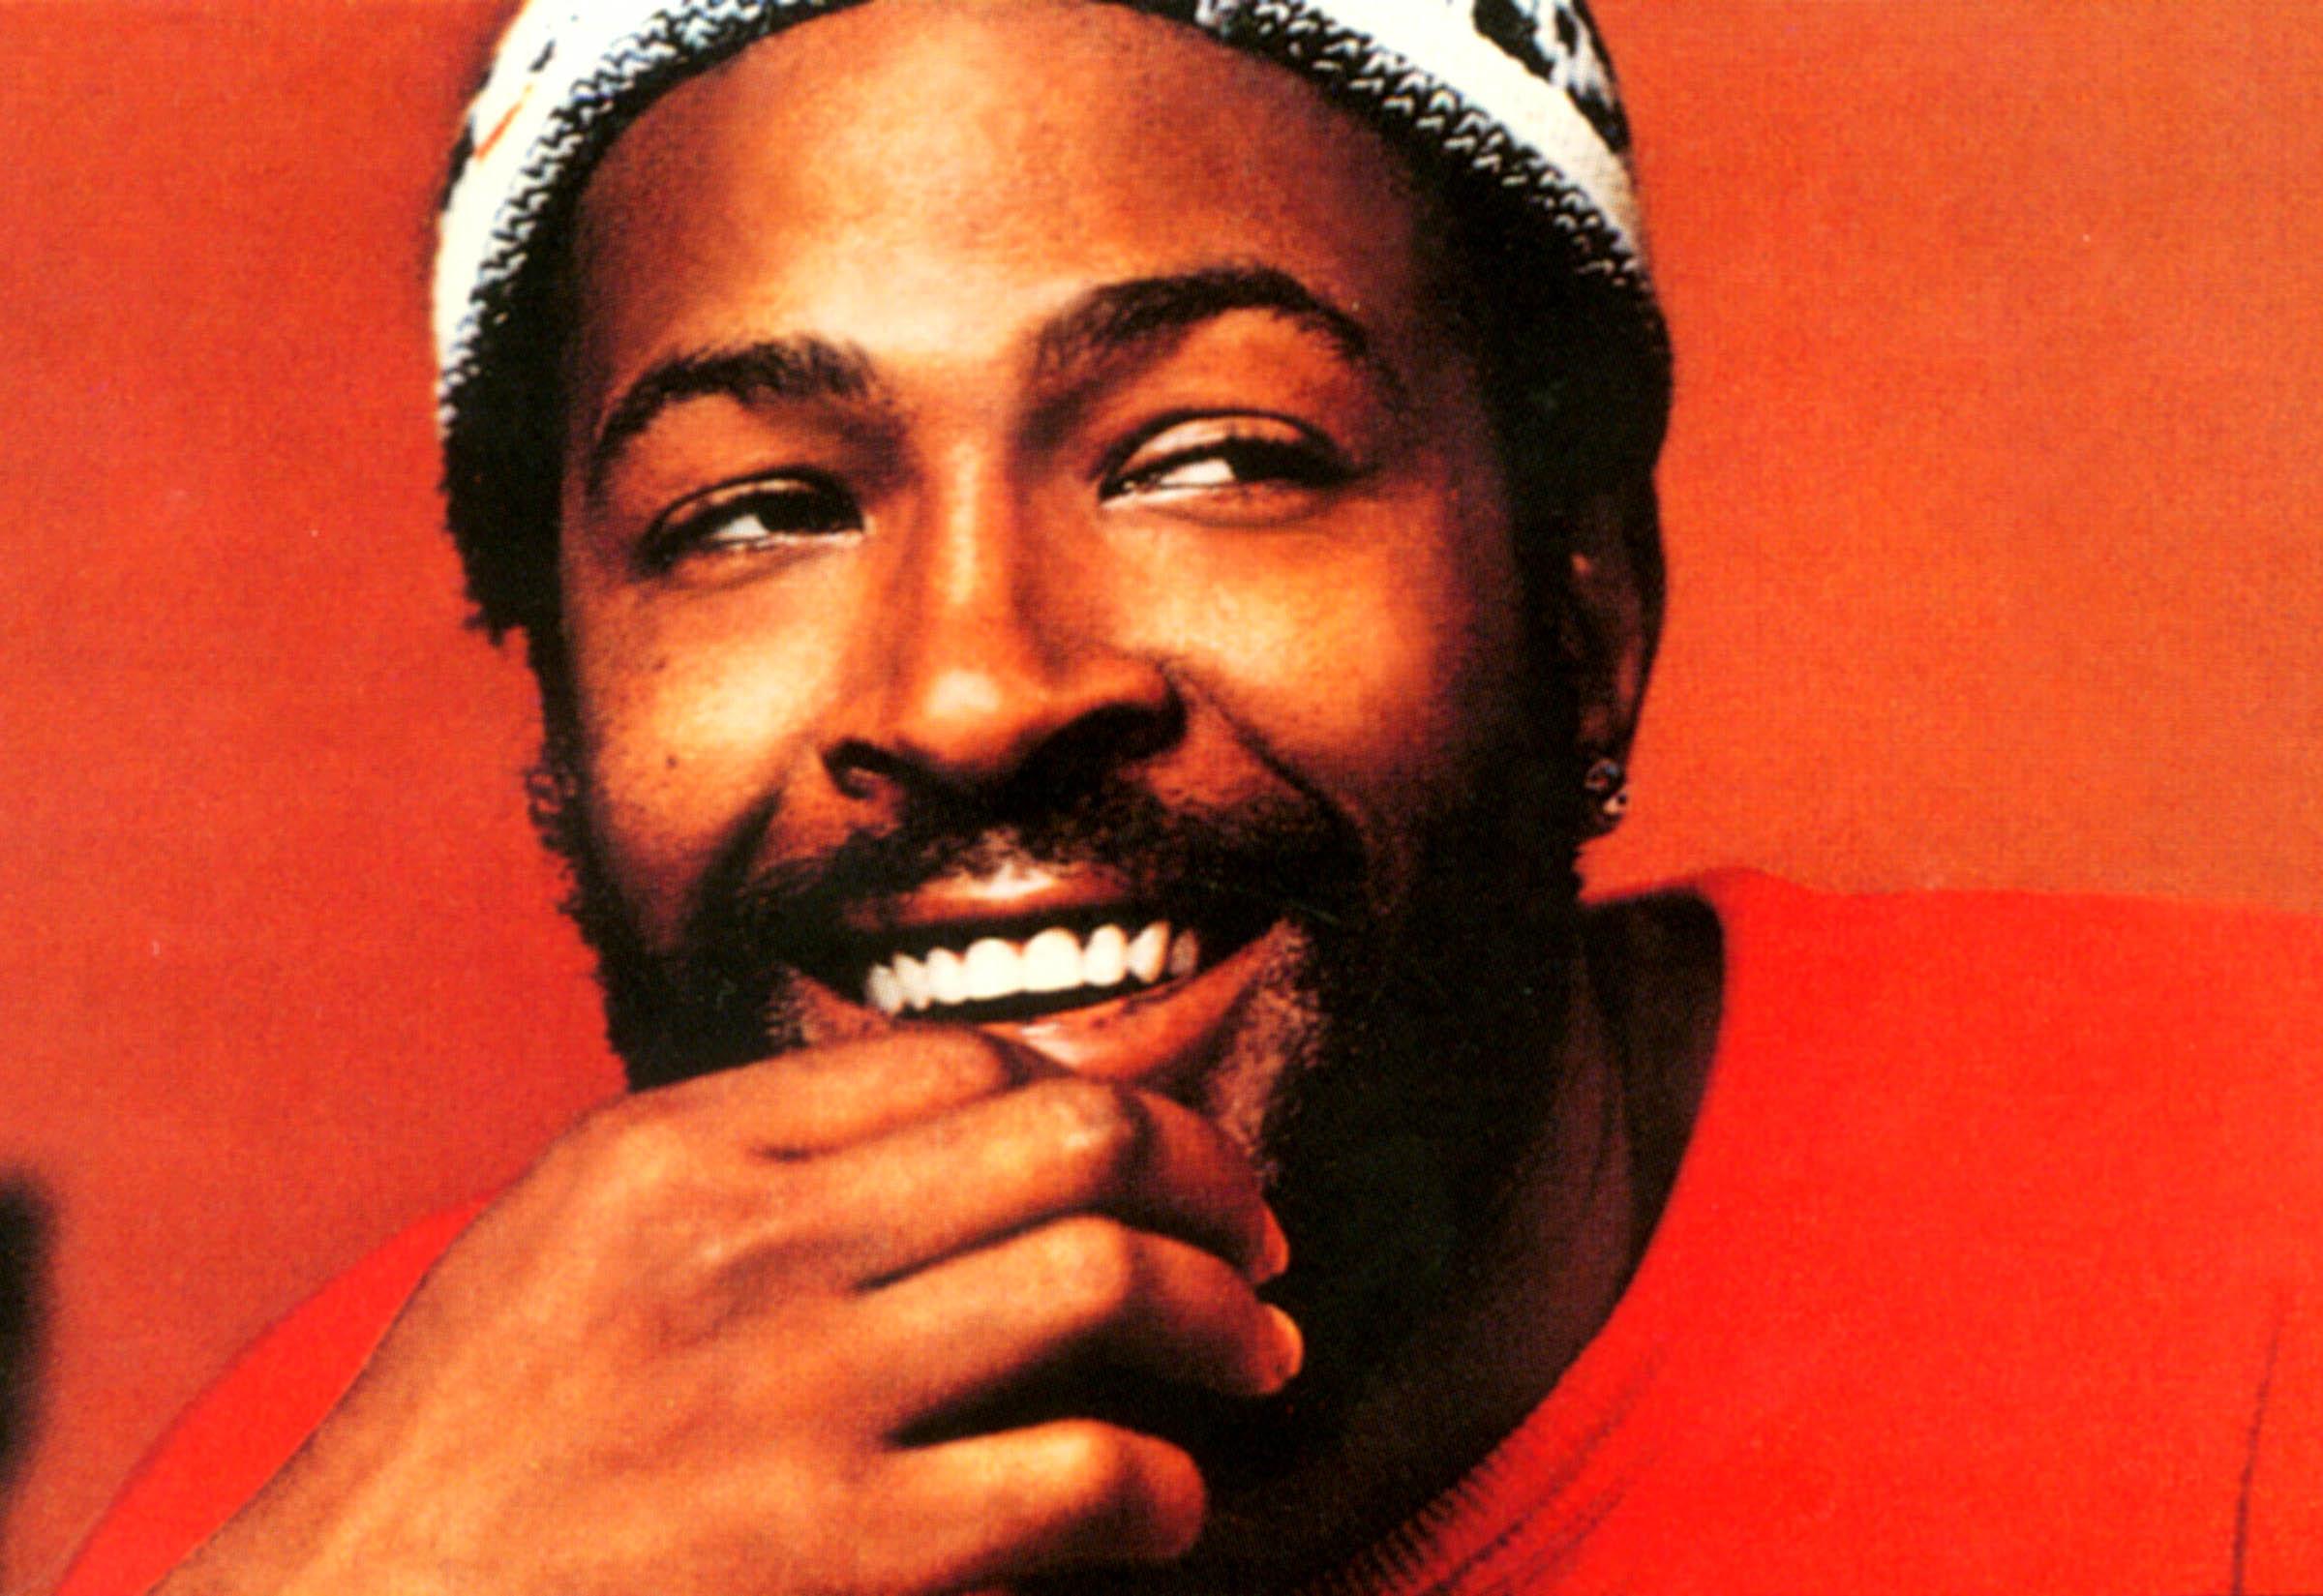 Wallpaper Of The Day: Marvin Gayex1649 Marvin Gaye Wallpaper